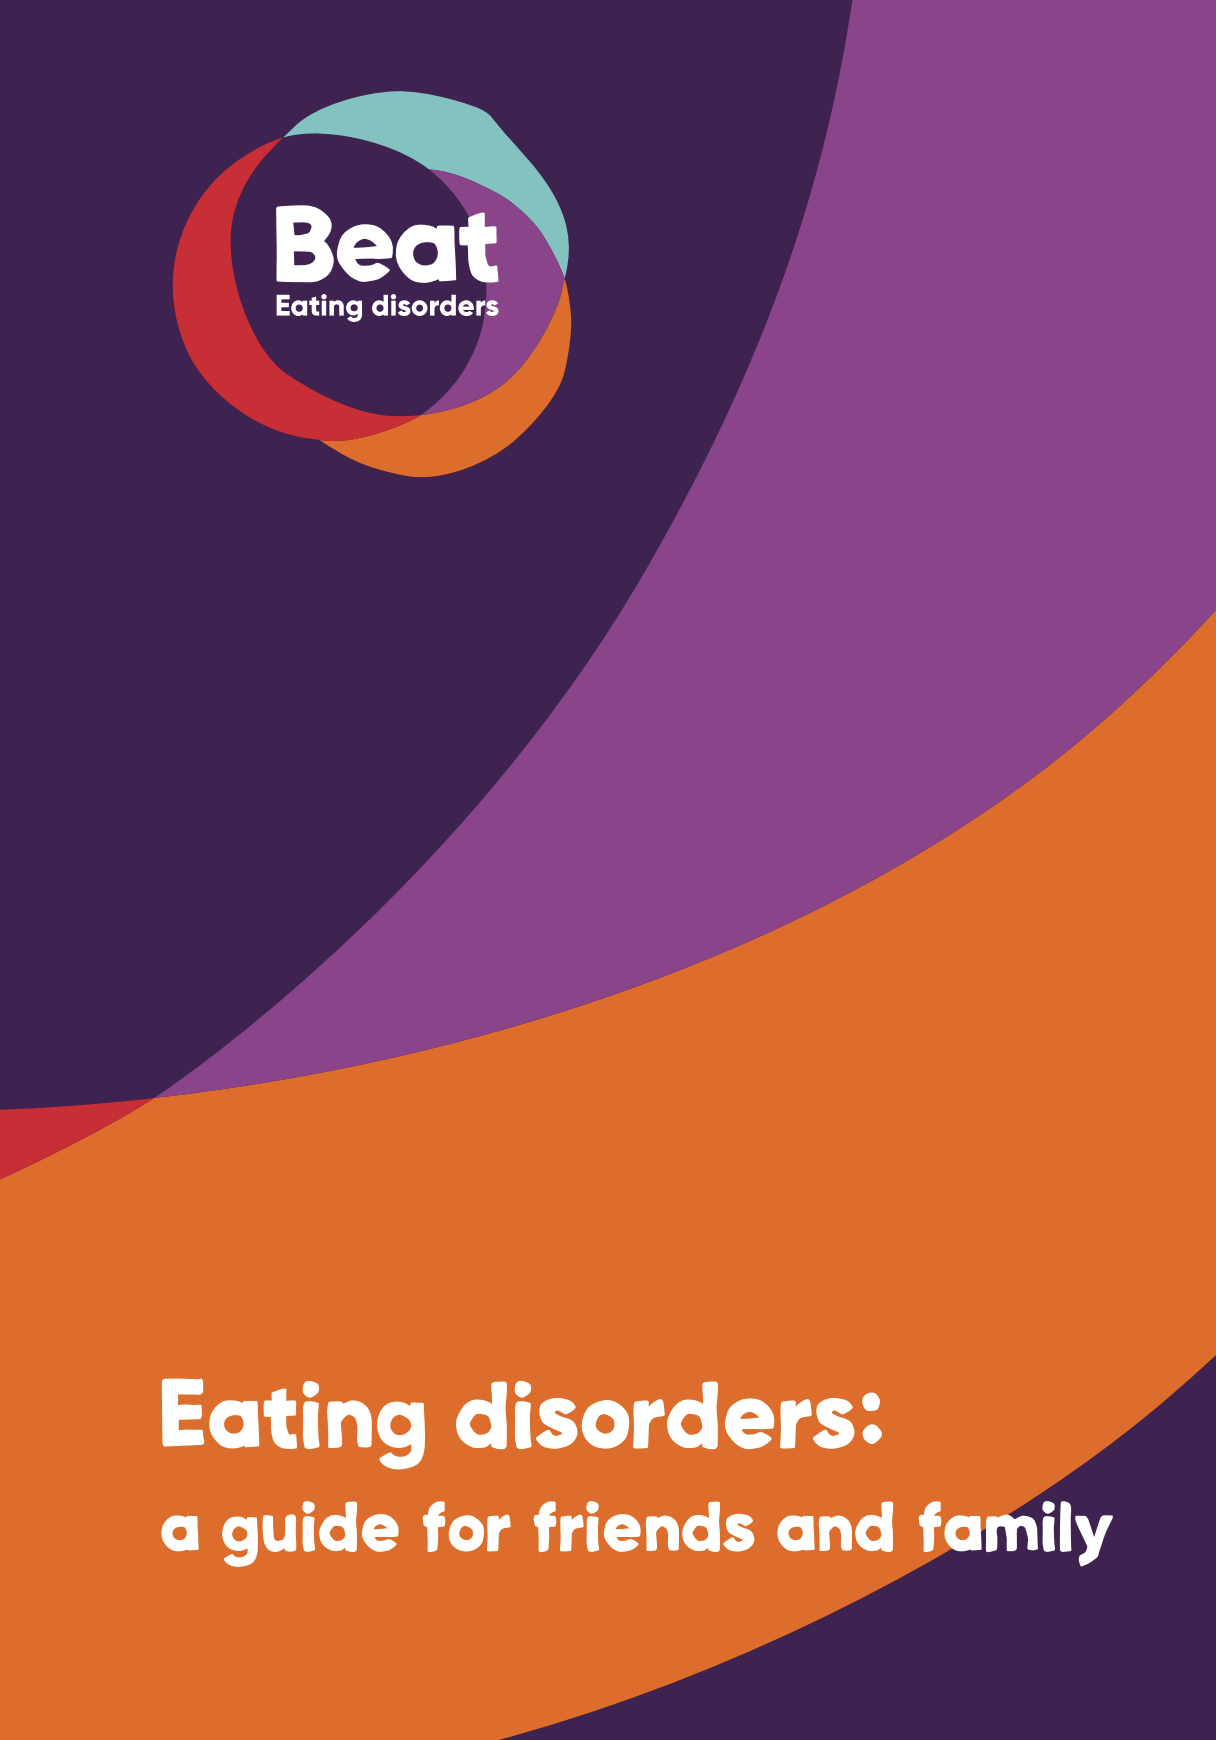 Beat eating disorders guide cover